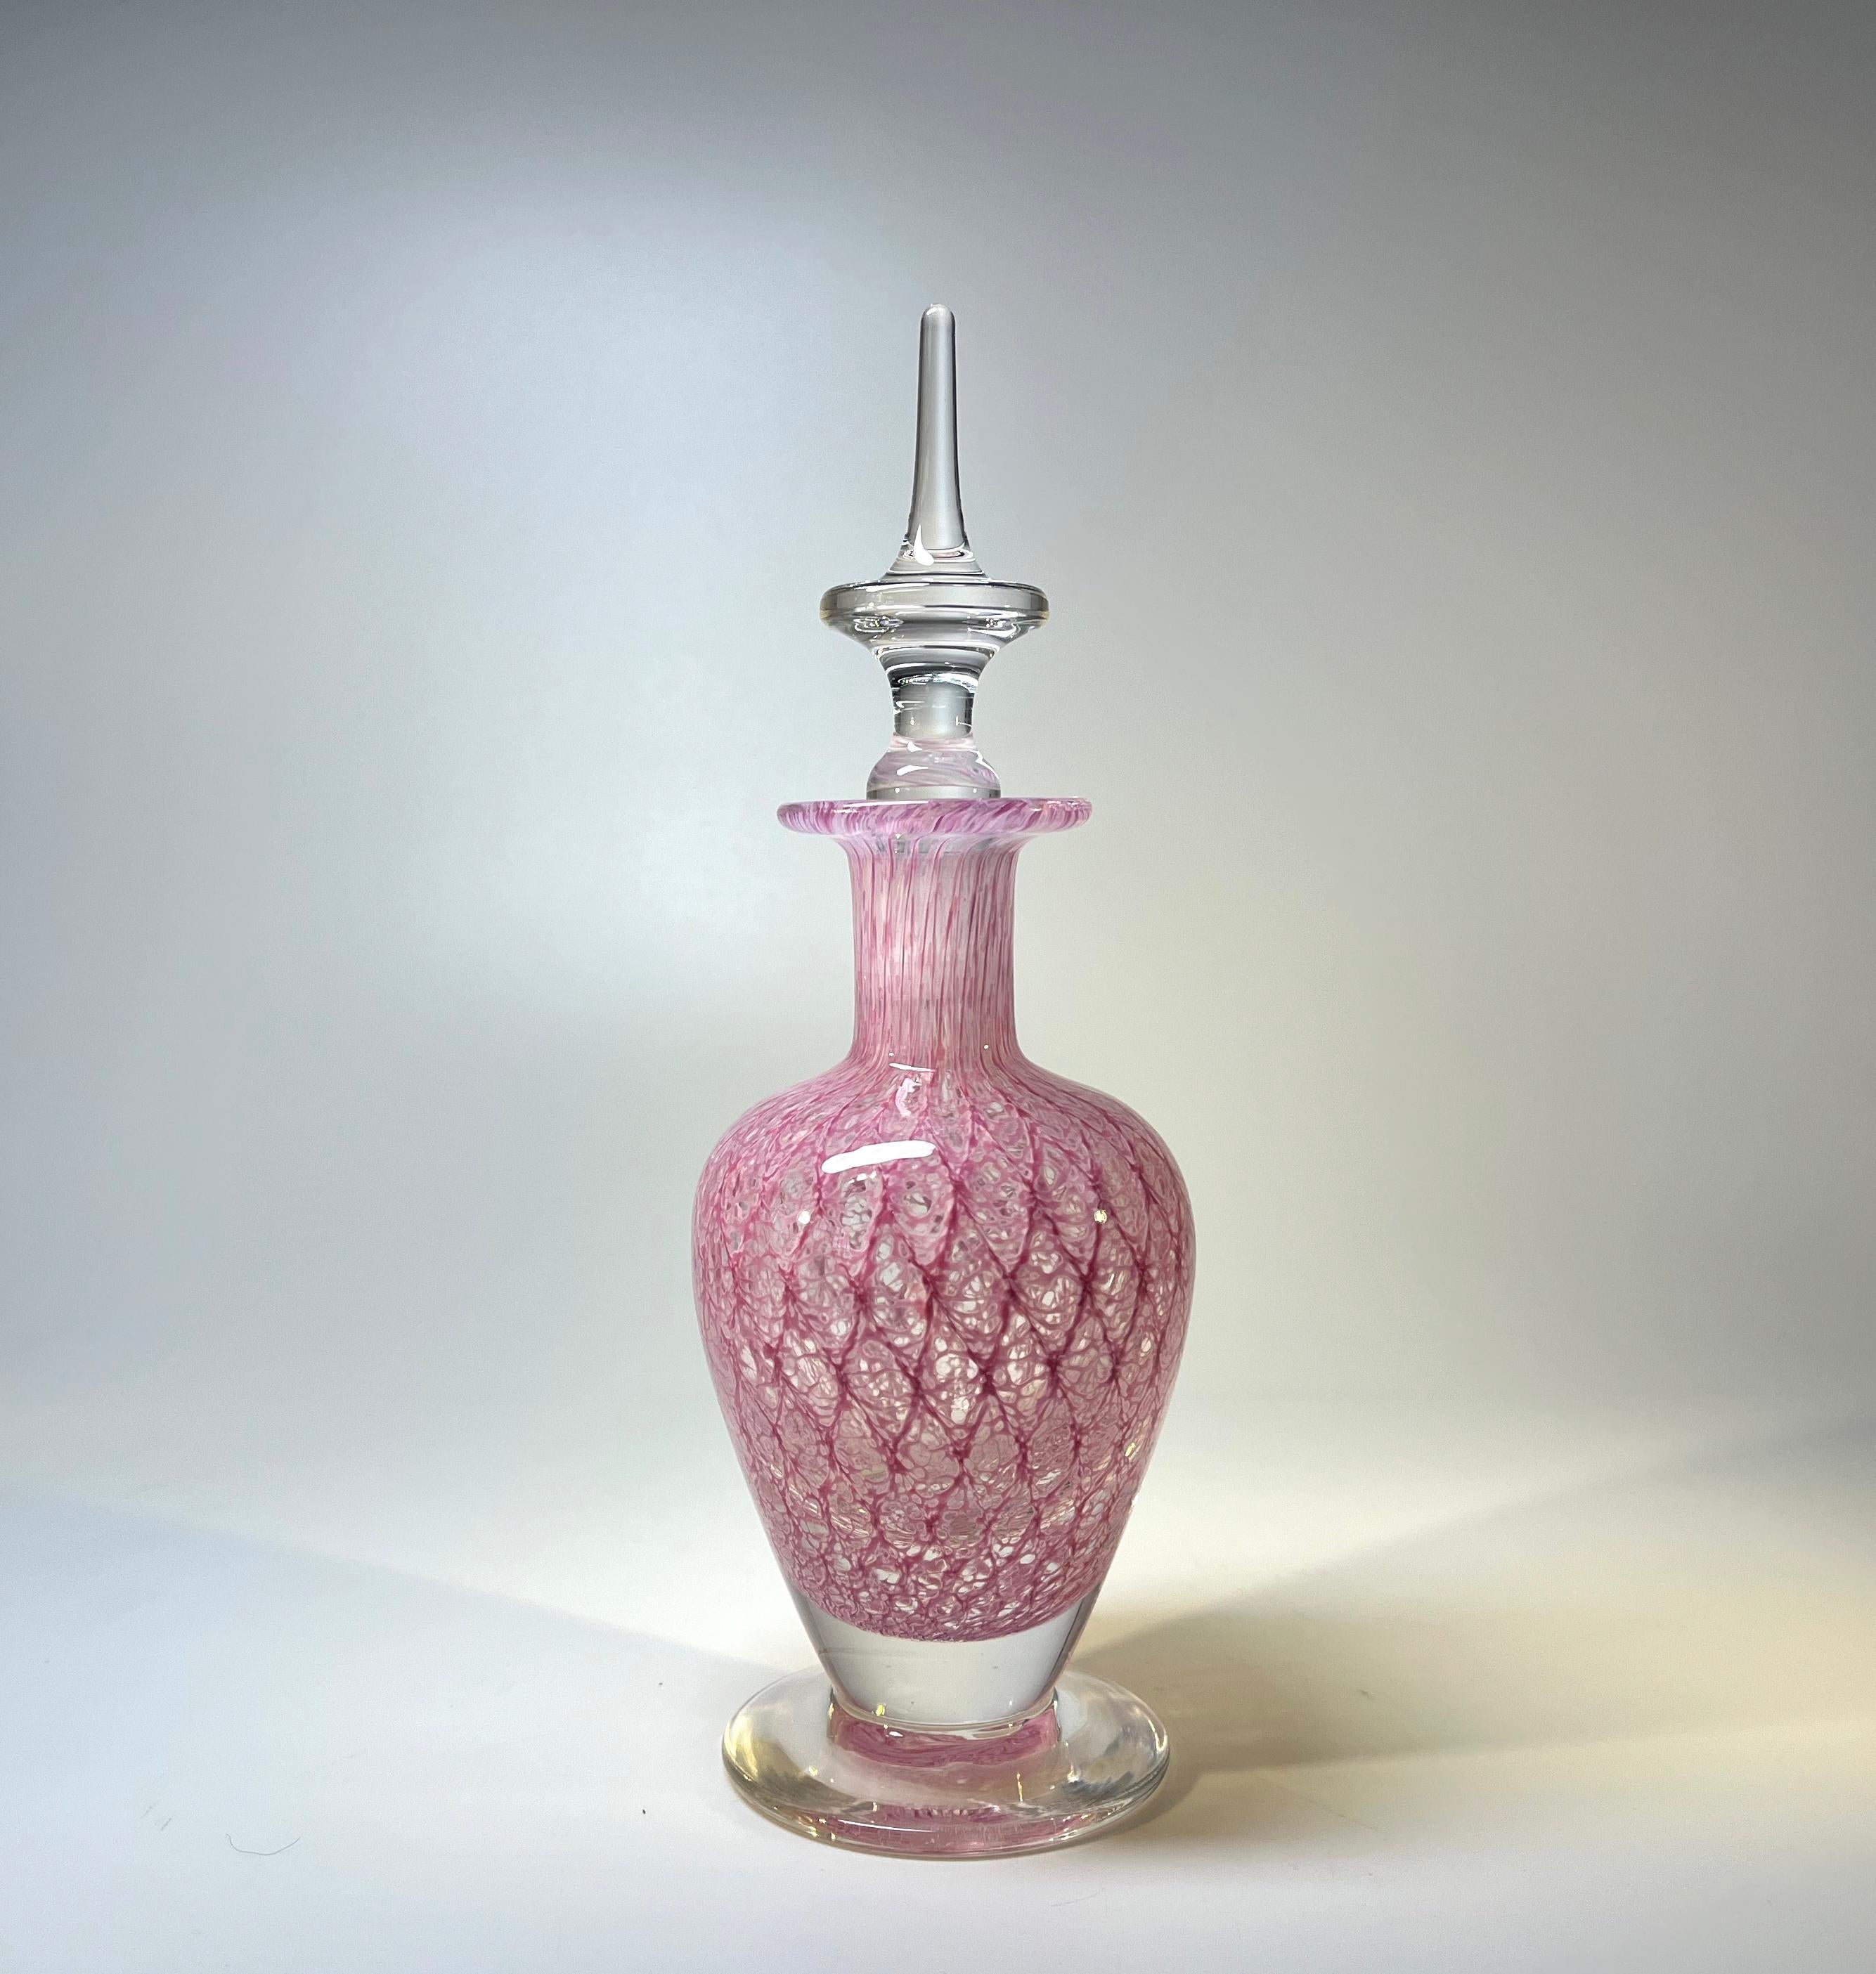 Absolutely exquisite English hand blown crystal perfume bottle from the 1980's.
A delightful and delicate Rose Pink lattice design with a clear crystal stopper.
Created by Teign Valley Glass of Devon, England
Signed TVG to the base
Circa 1980's